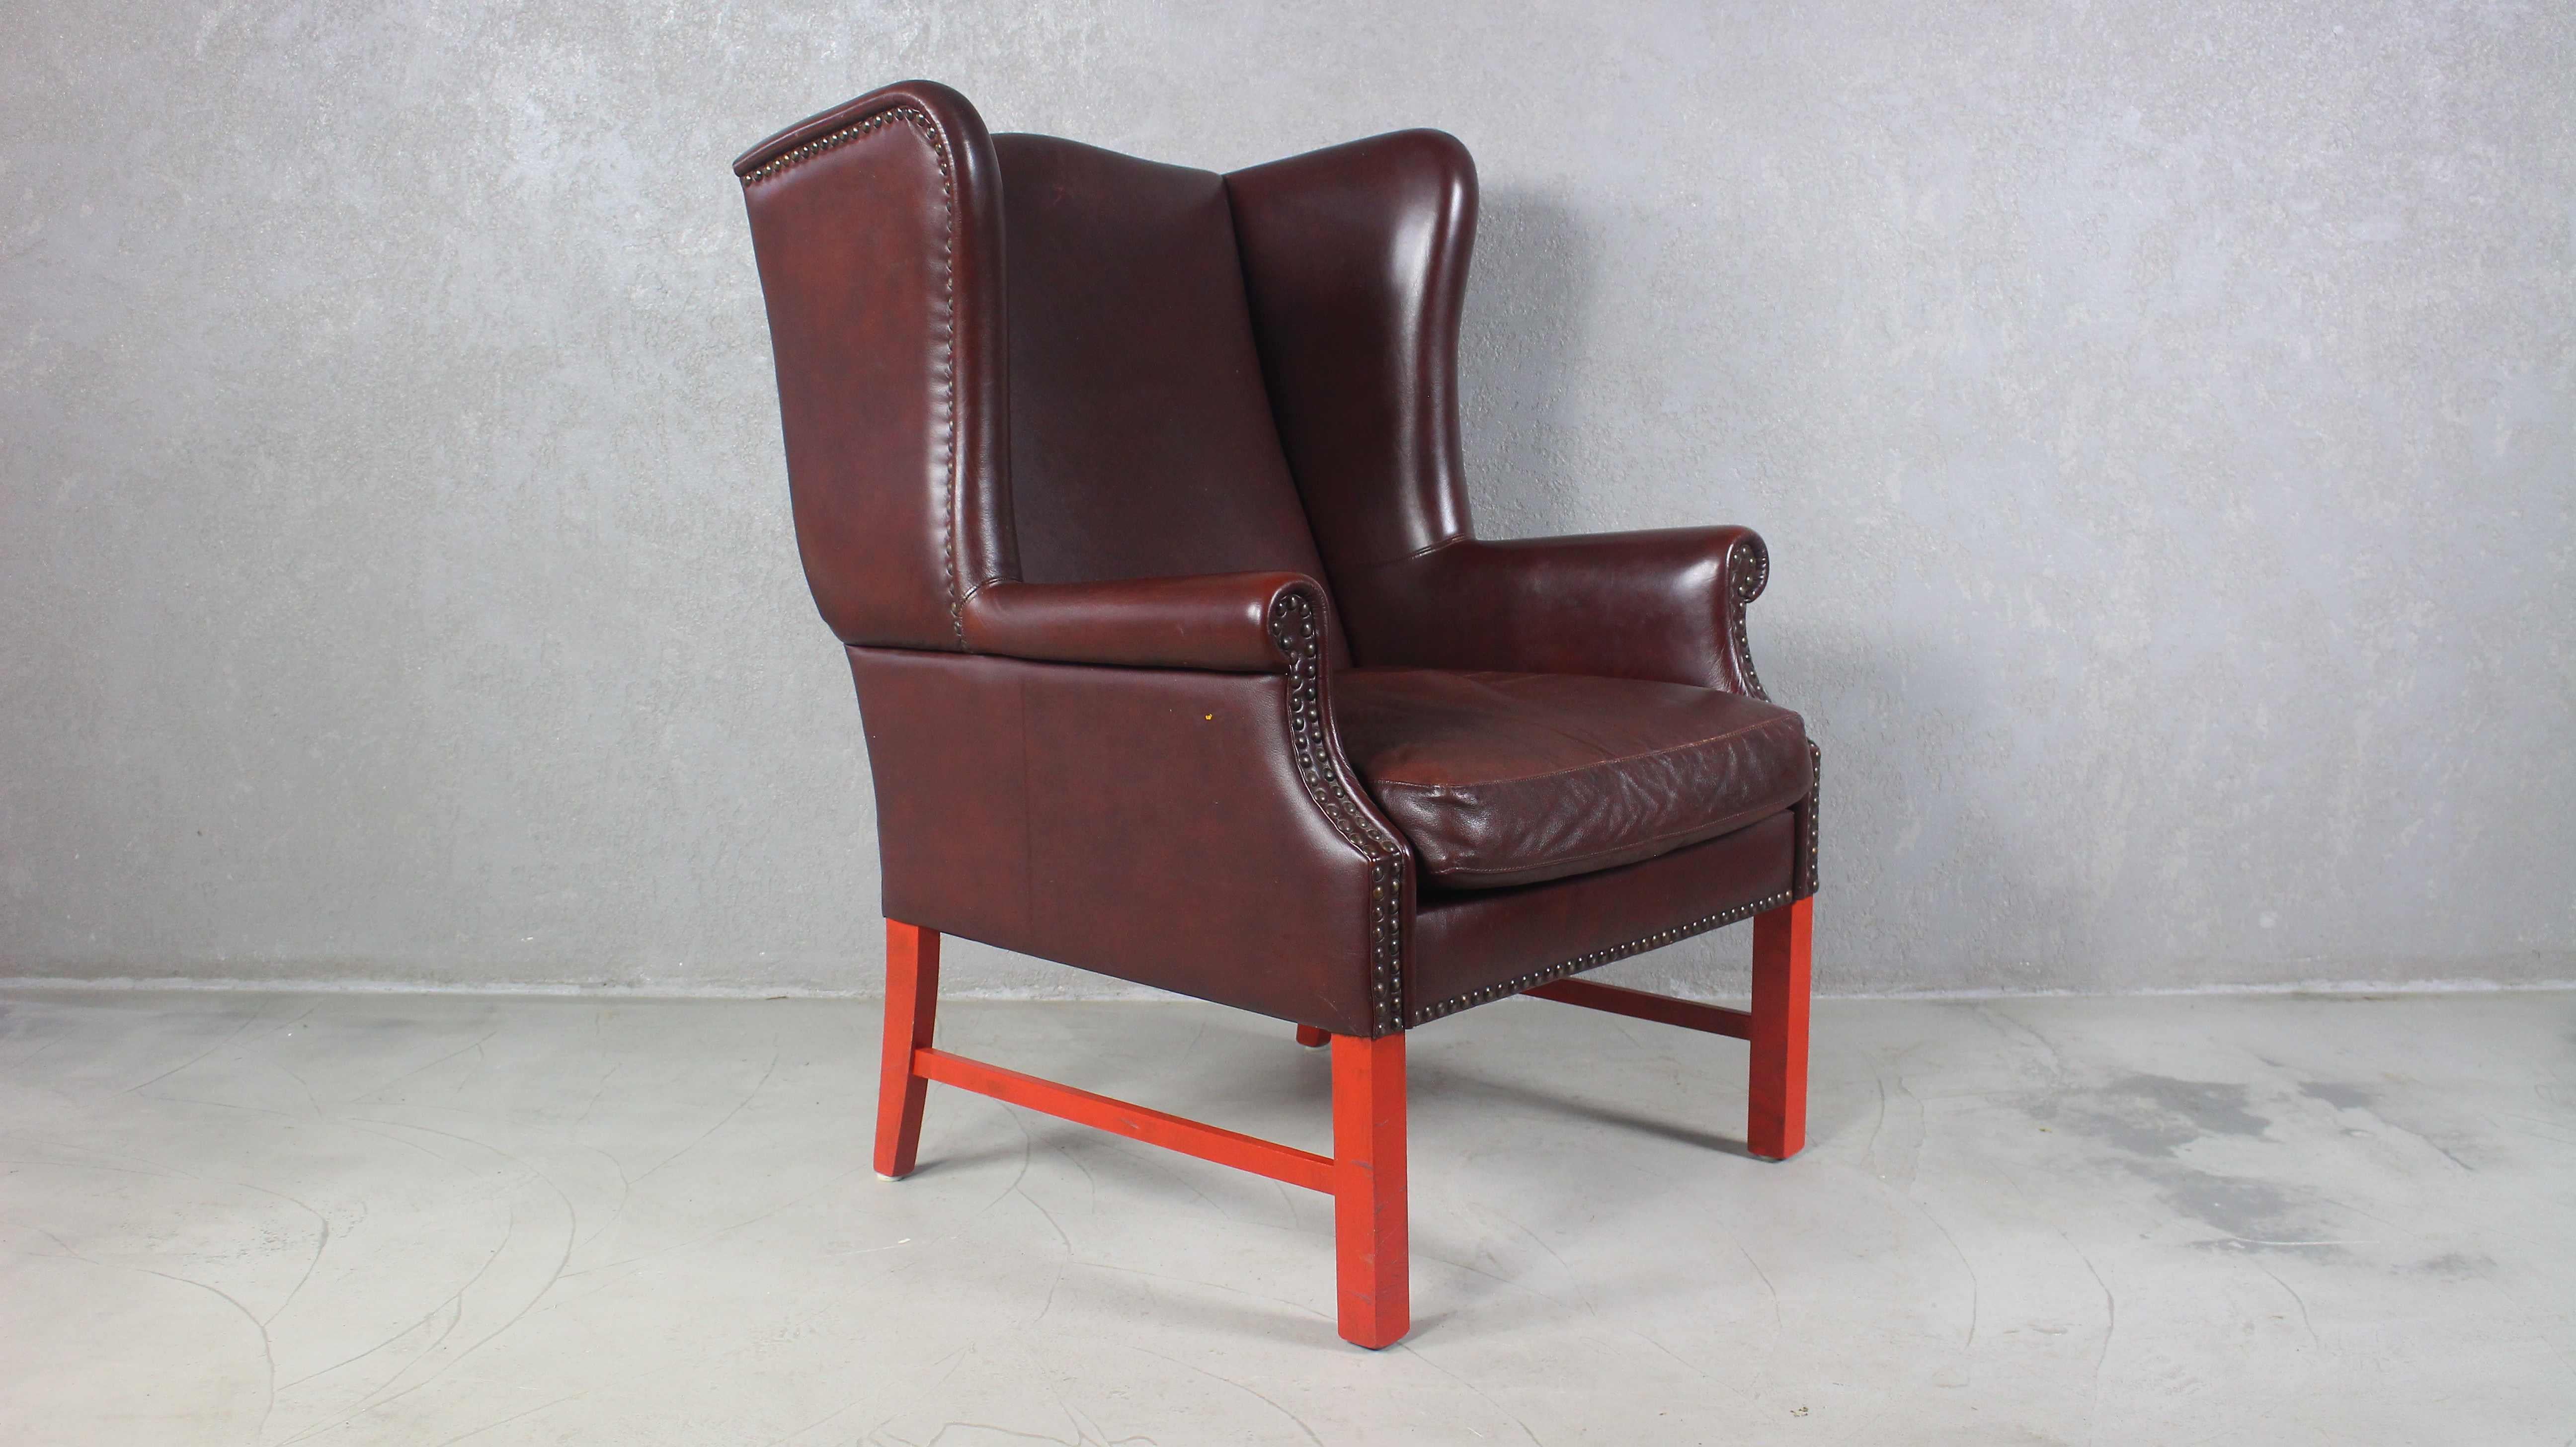 English George III style wingback armchair finished in brown leather. 
The wing chair features fully developed wings and is accented by brass tack nail heads on the borders.